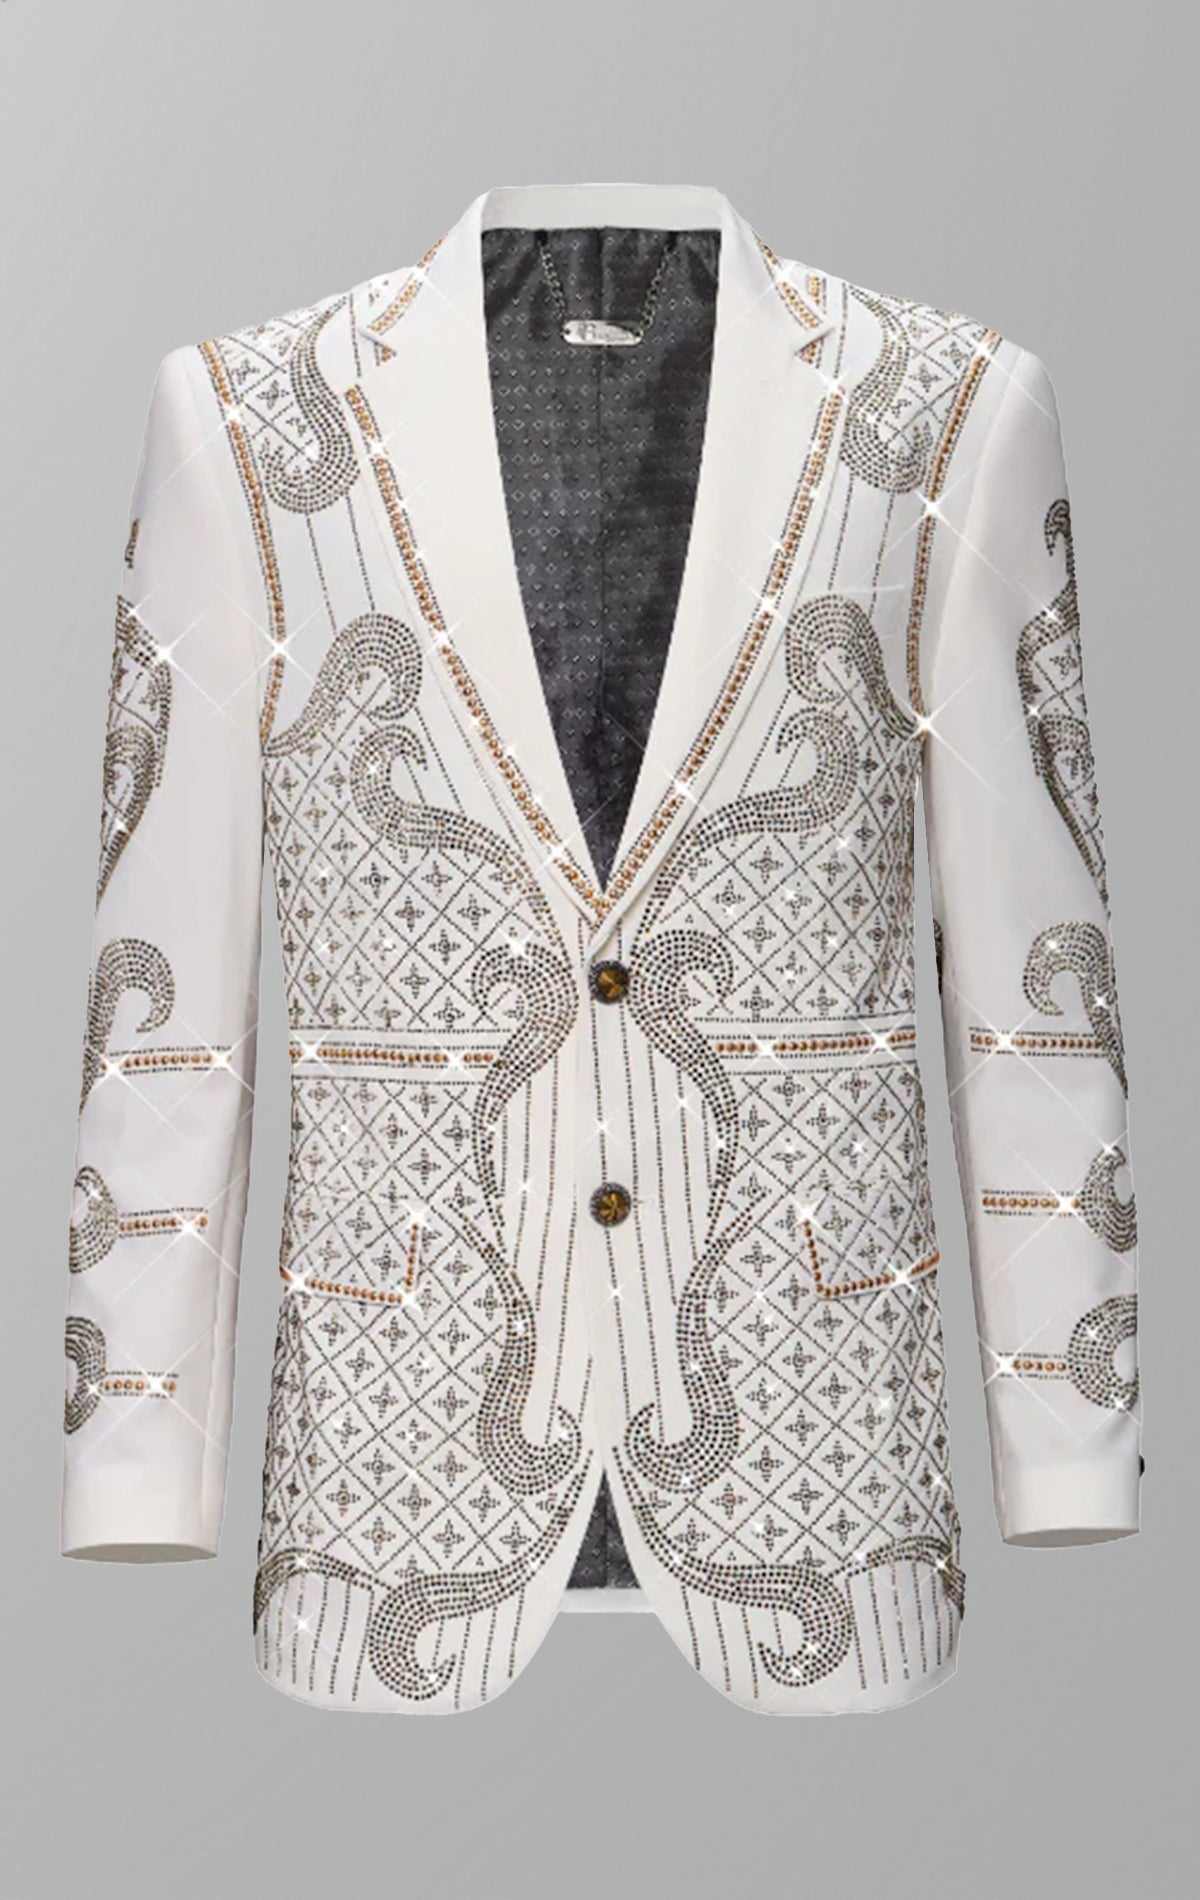 Embellished blazer with intricate details and tailored silhouette for special occasions.